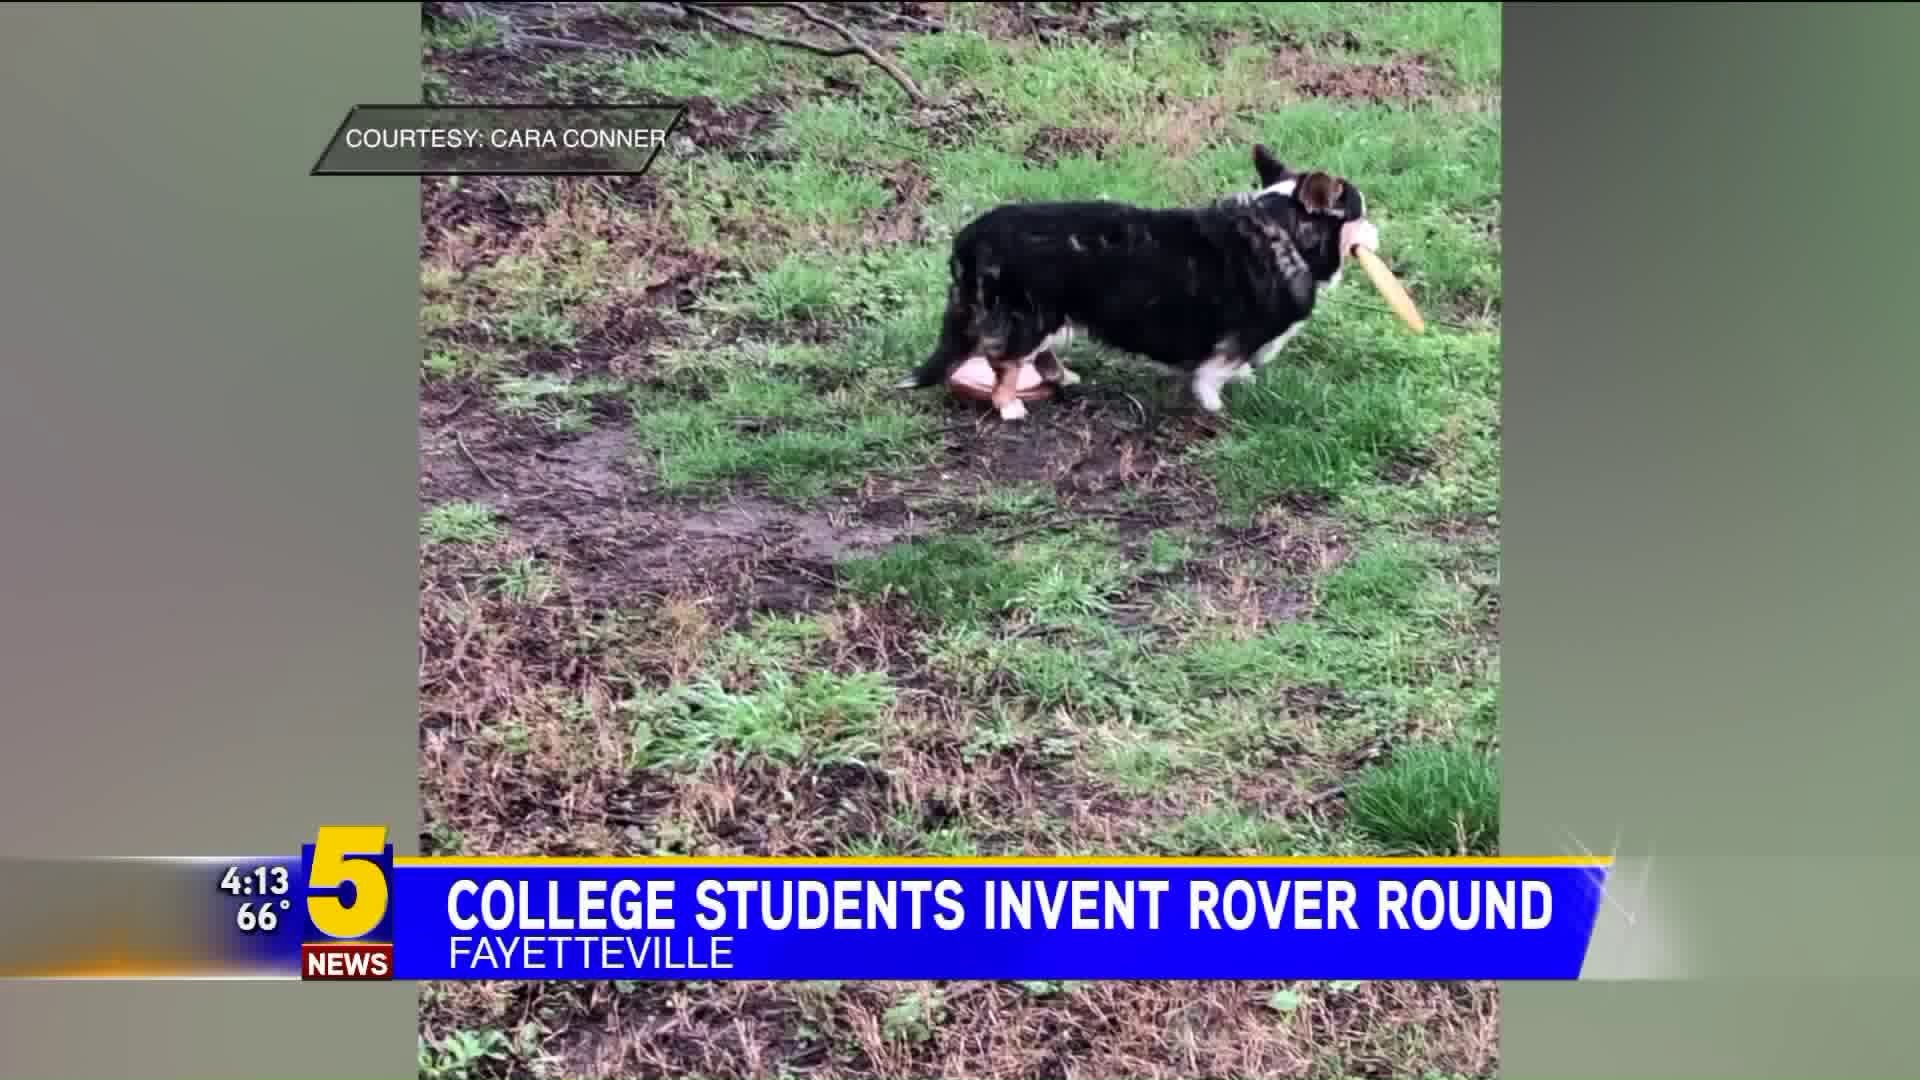 College Students Invent Rover Round